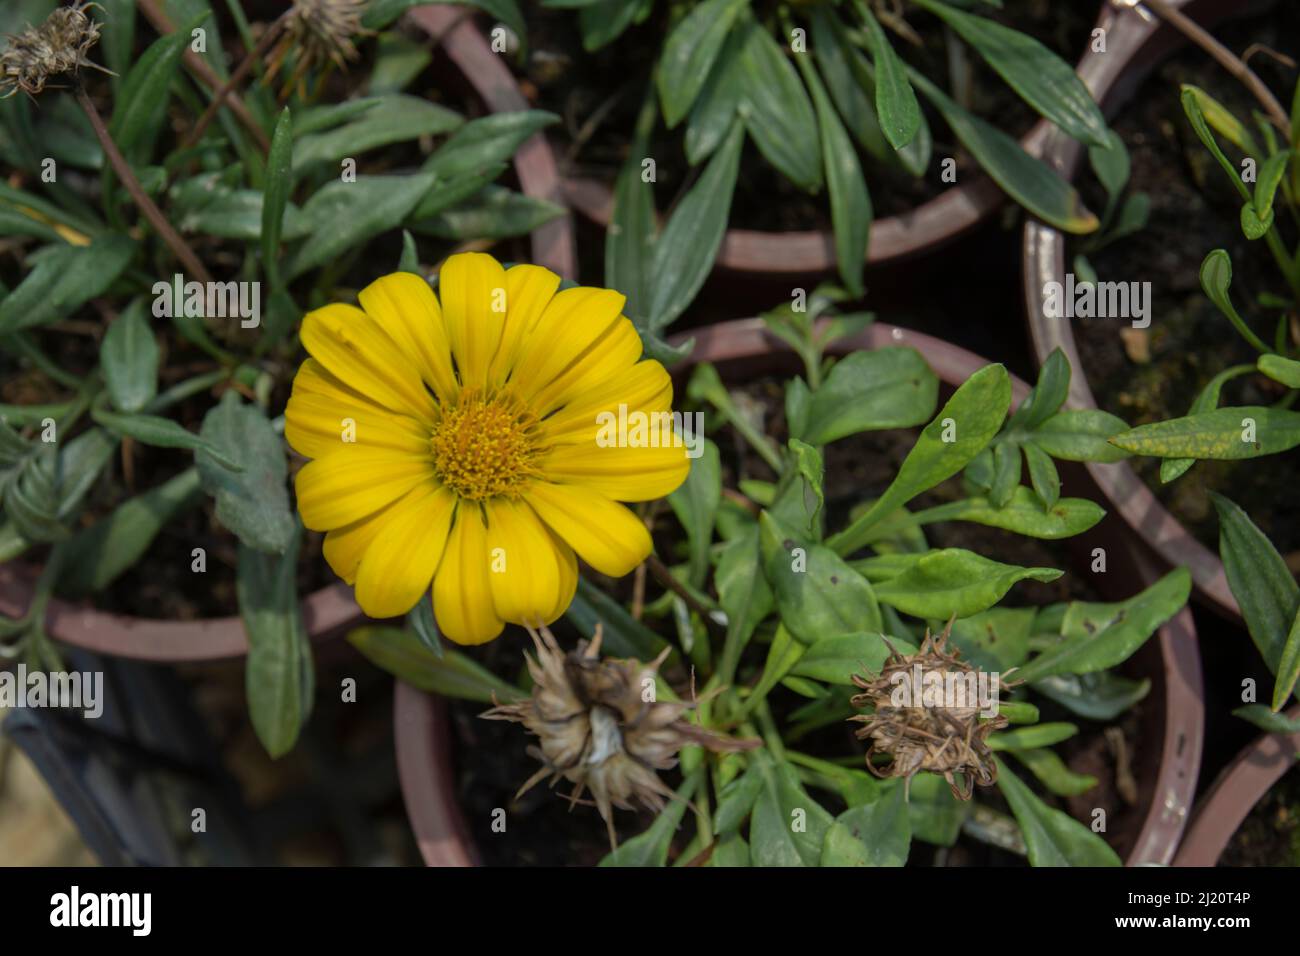 Calendula arvensis is a species of flowering plant in the daisy family known by the common name field marigold. Selective Focus Stock Photo